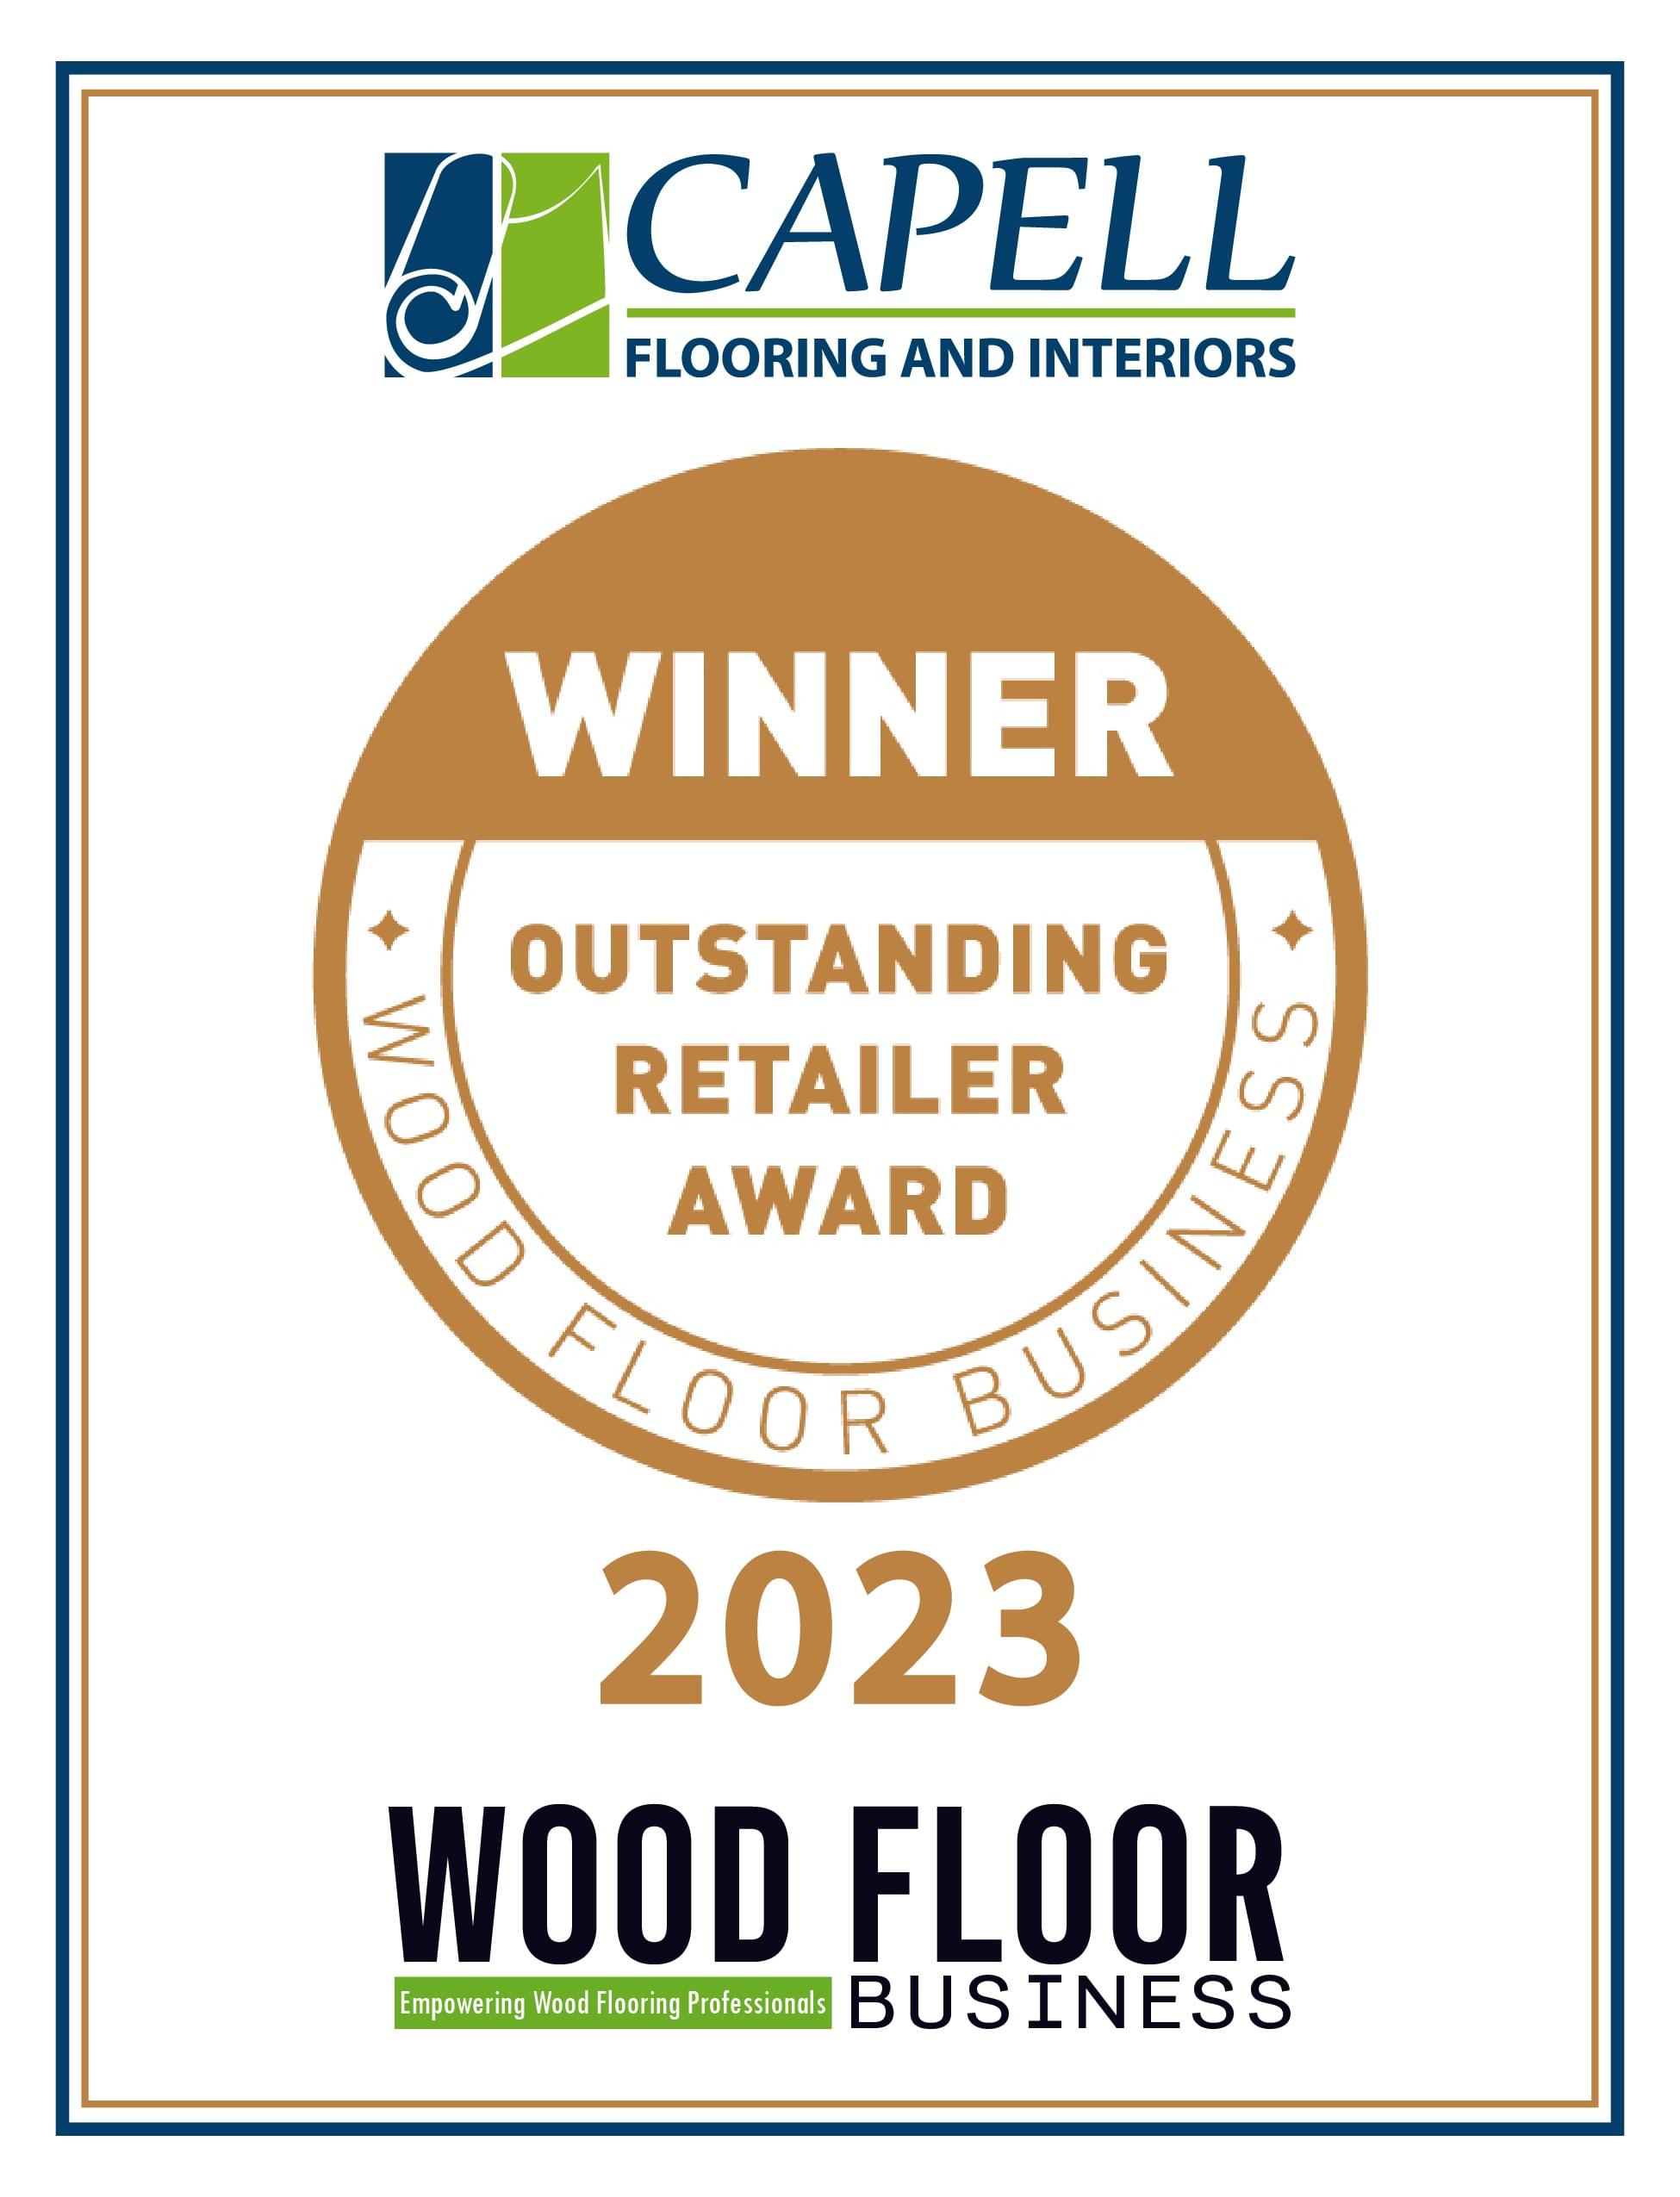 Capell Flooring and Interiors, Wood Floor Business Retailer of the Year 2023 Capell Flooring